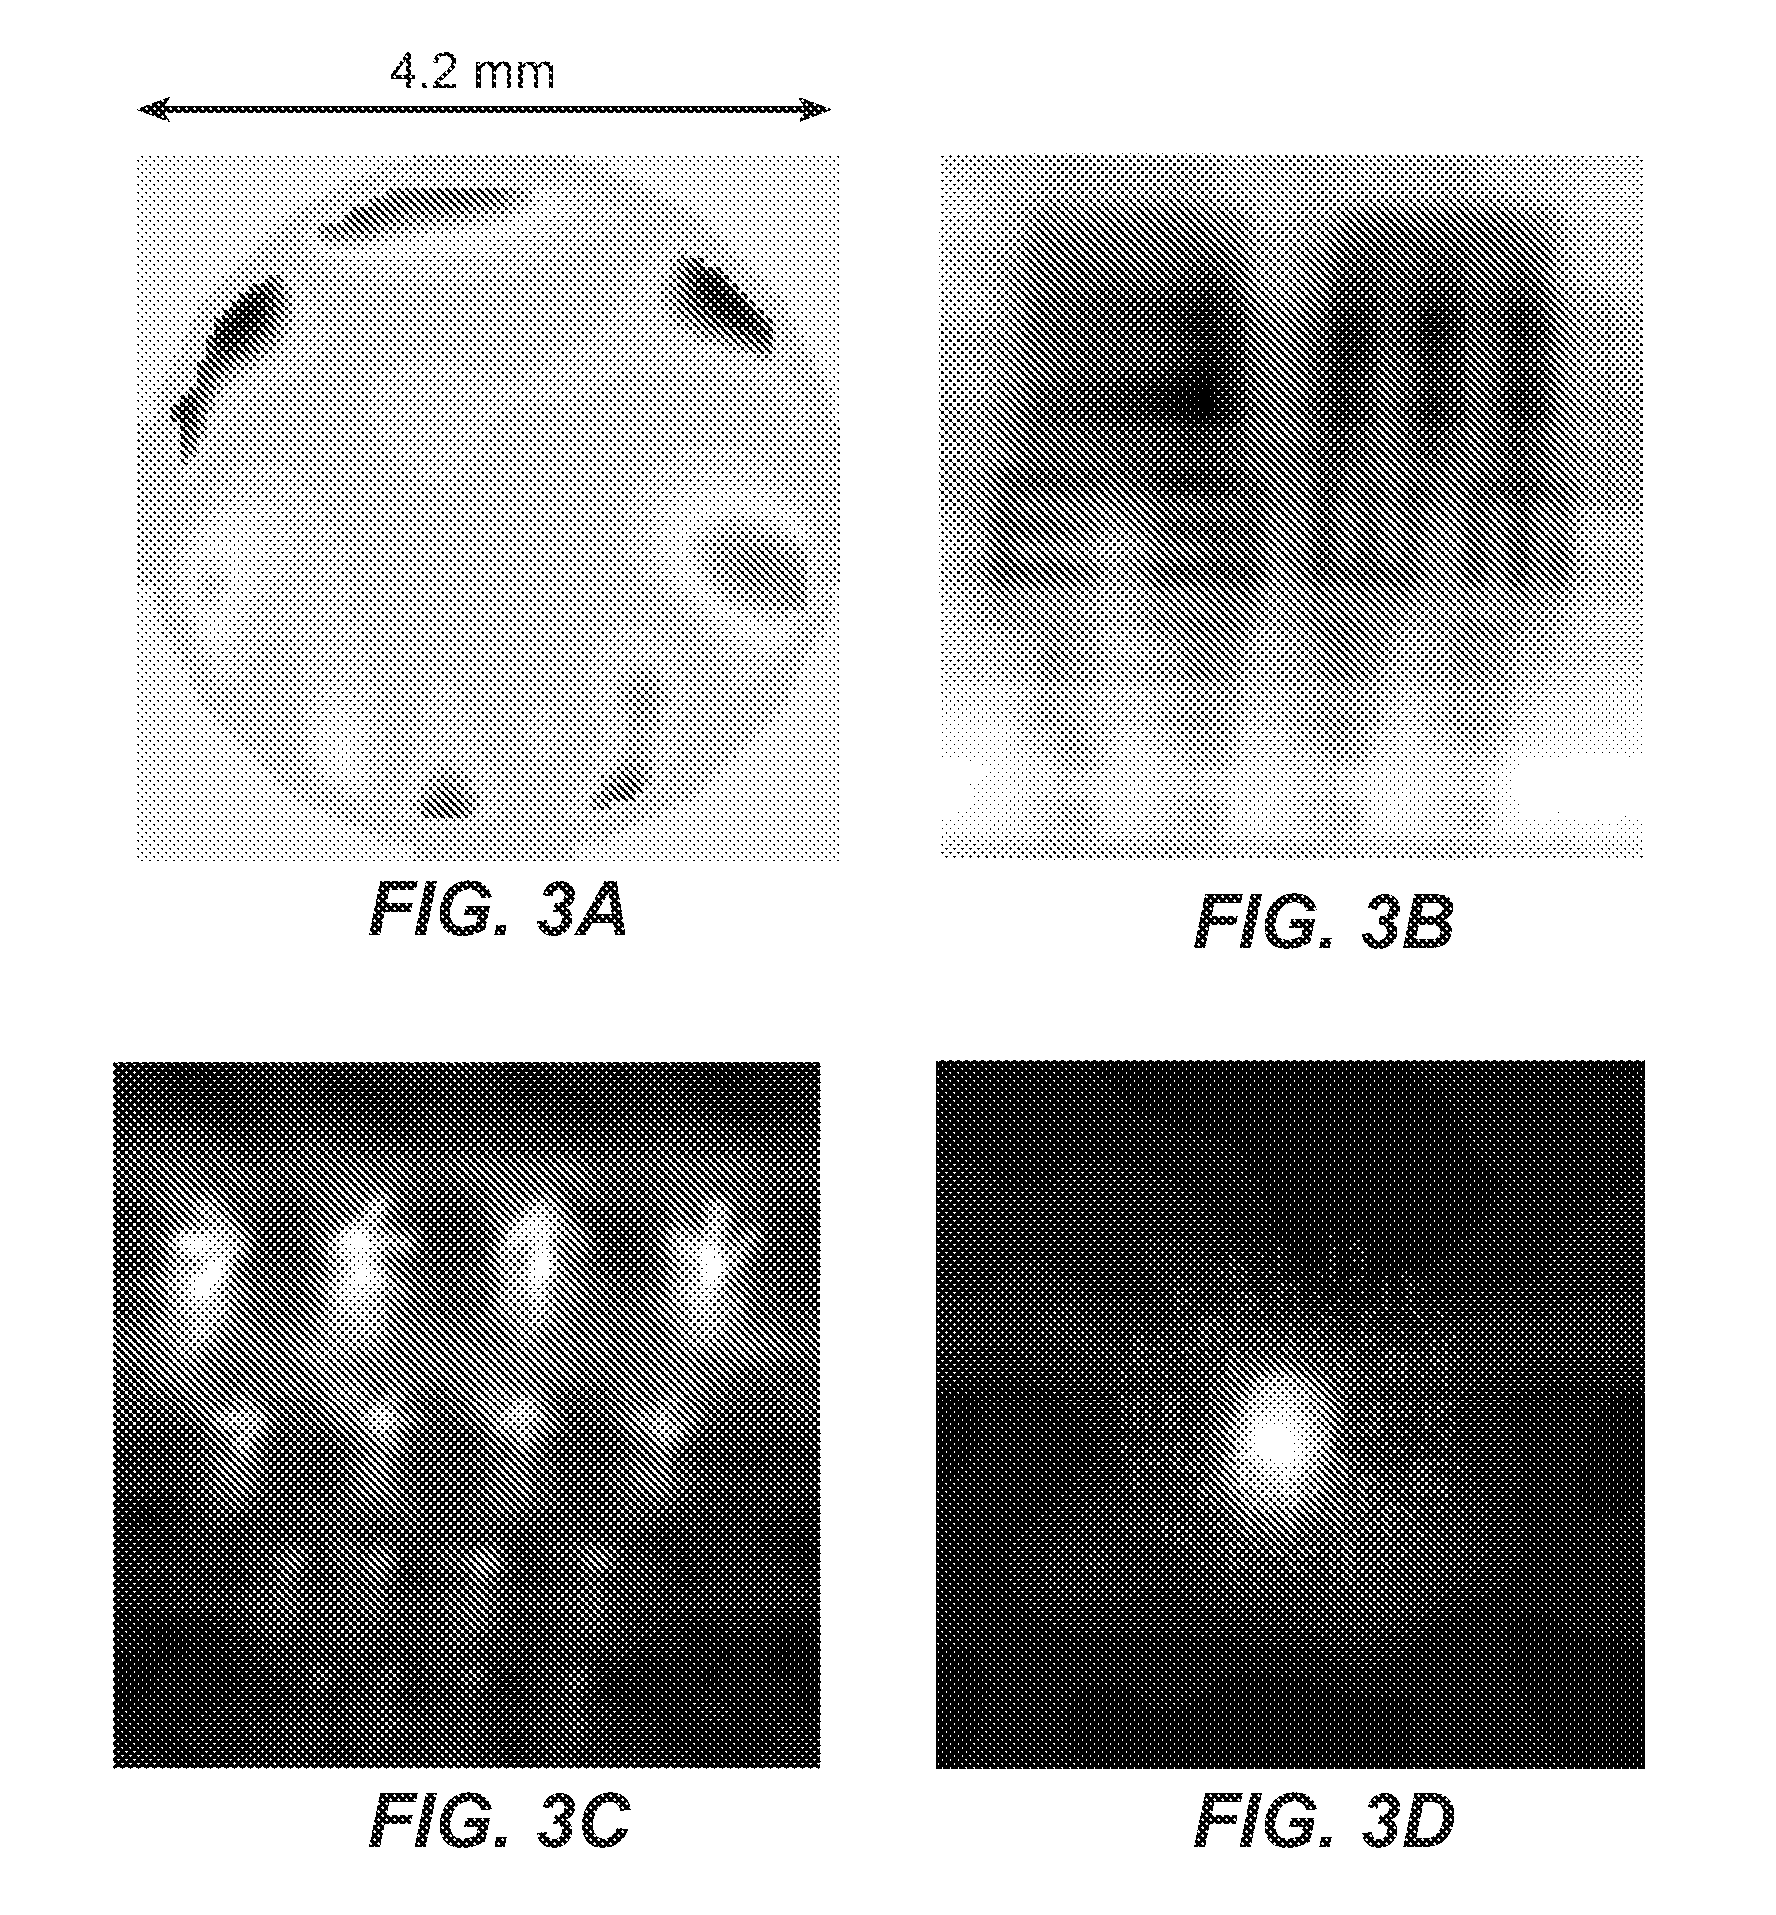 Methods and apparatus for improving vision